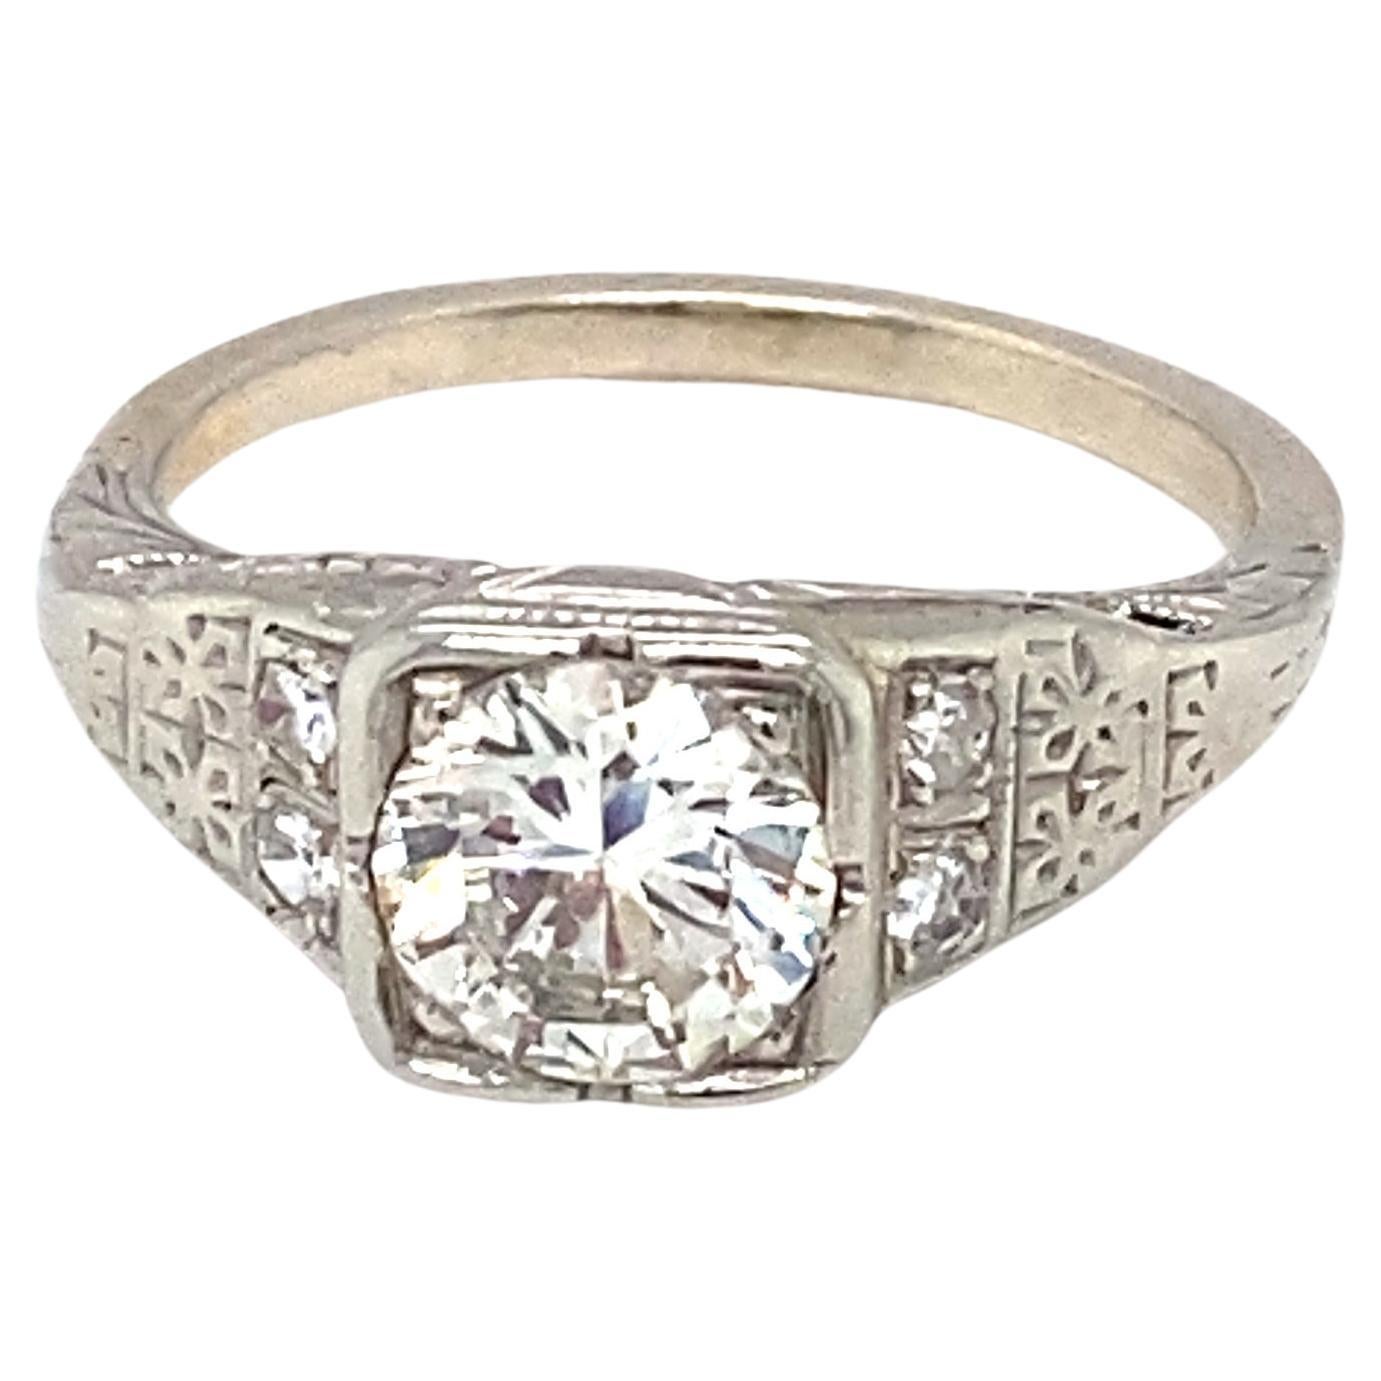 Circa 1940s 0.85 Carat Diamond Engagement Ring in Platinum and 14 K White Gold For Sale